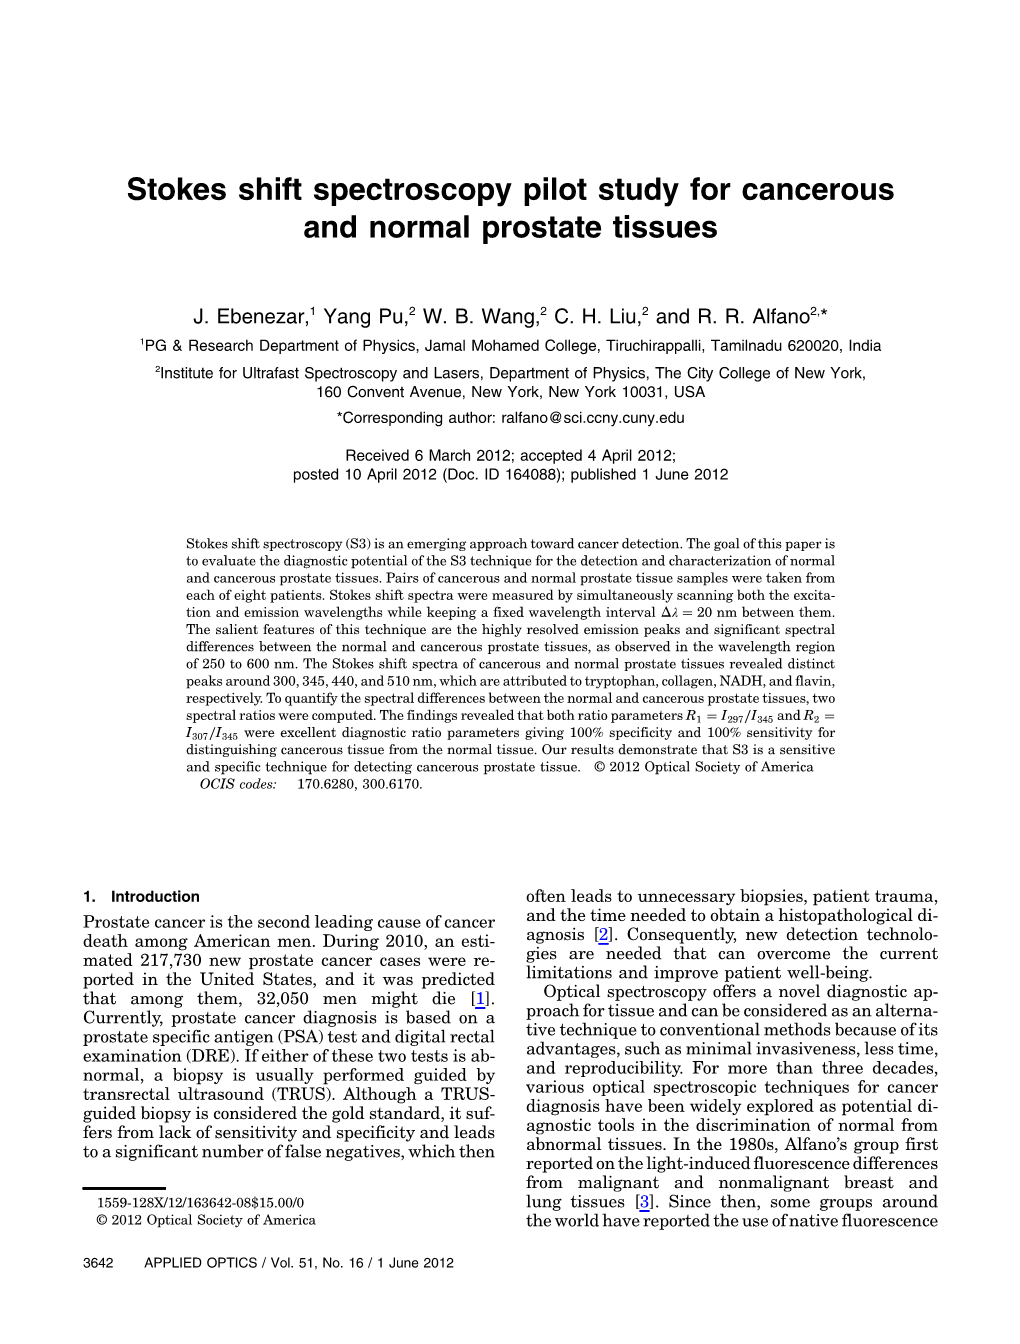 Stokes Shift Spectroscopy Pilot Study for Cancerous and Normal Prostate Tissues